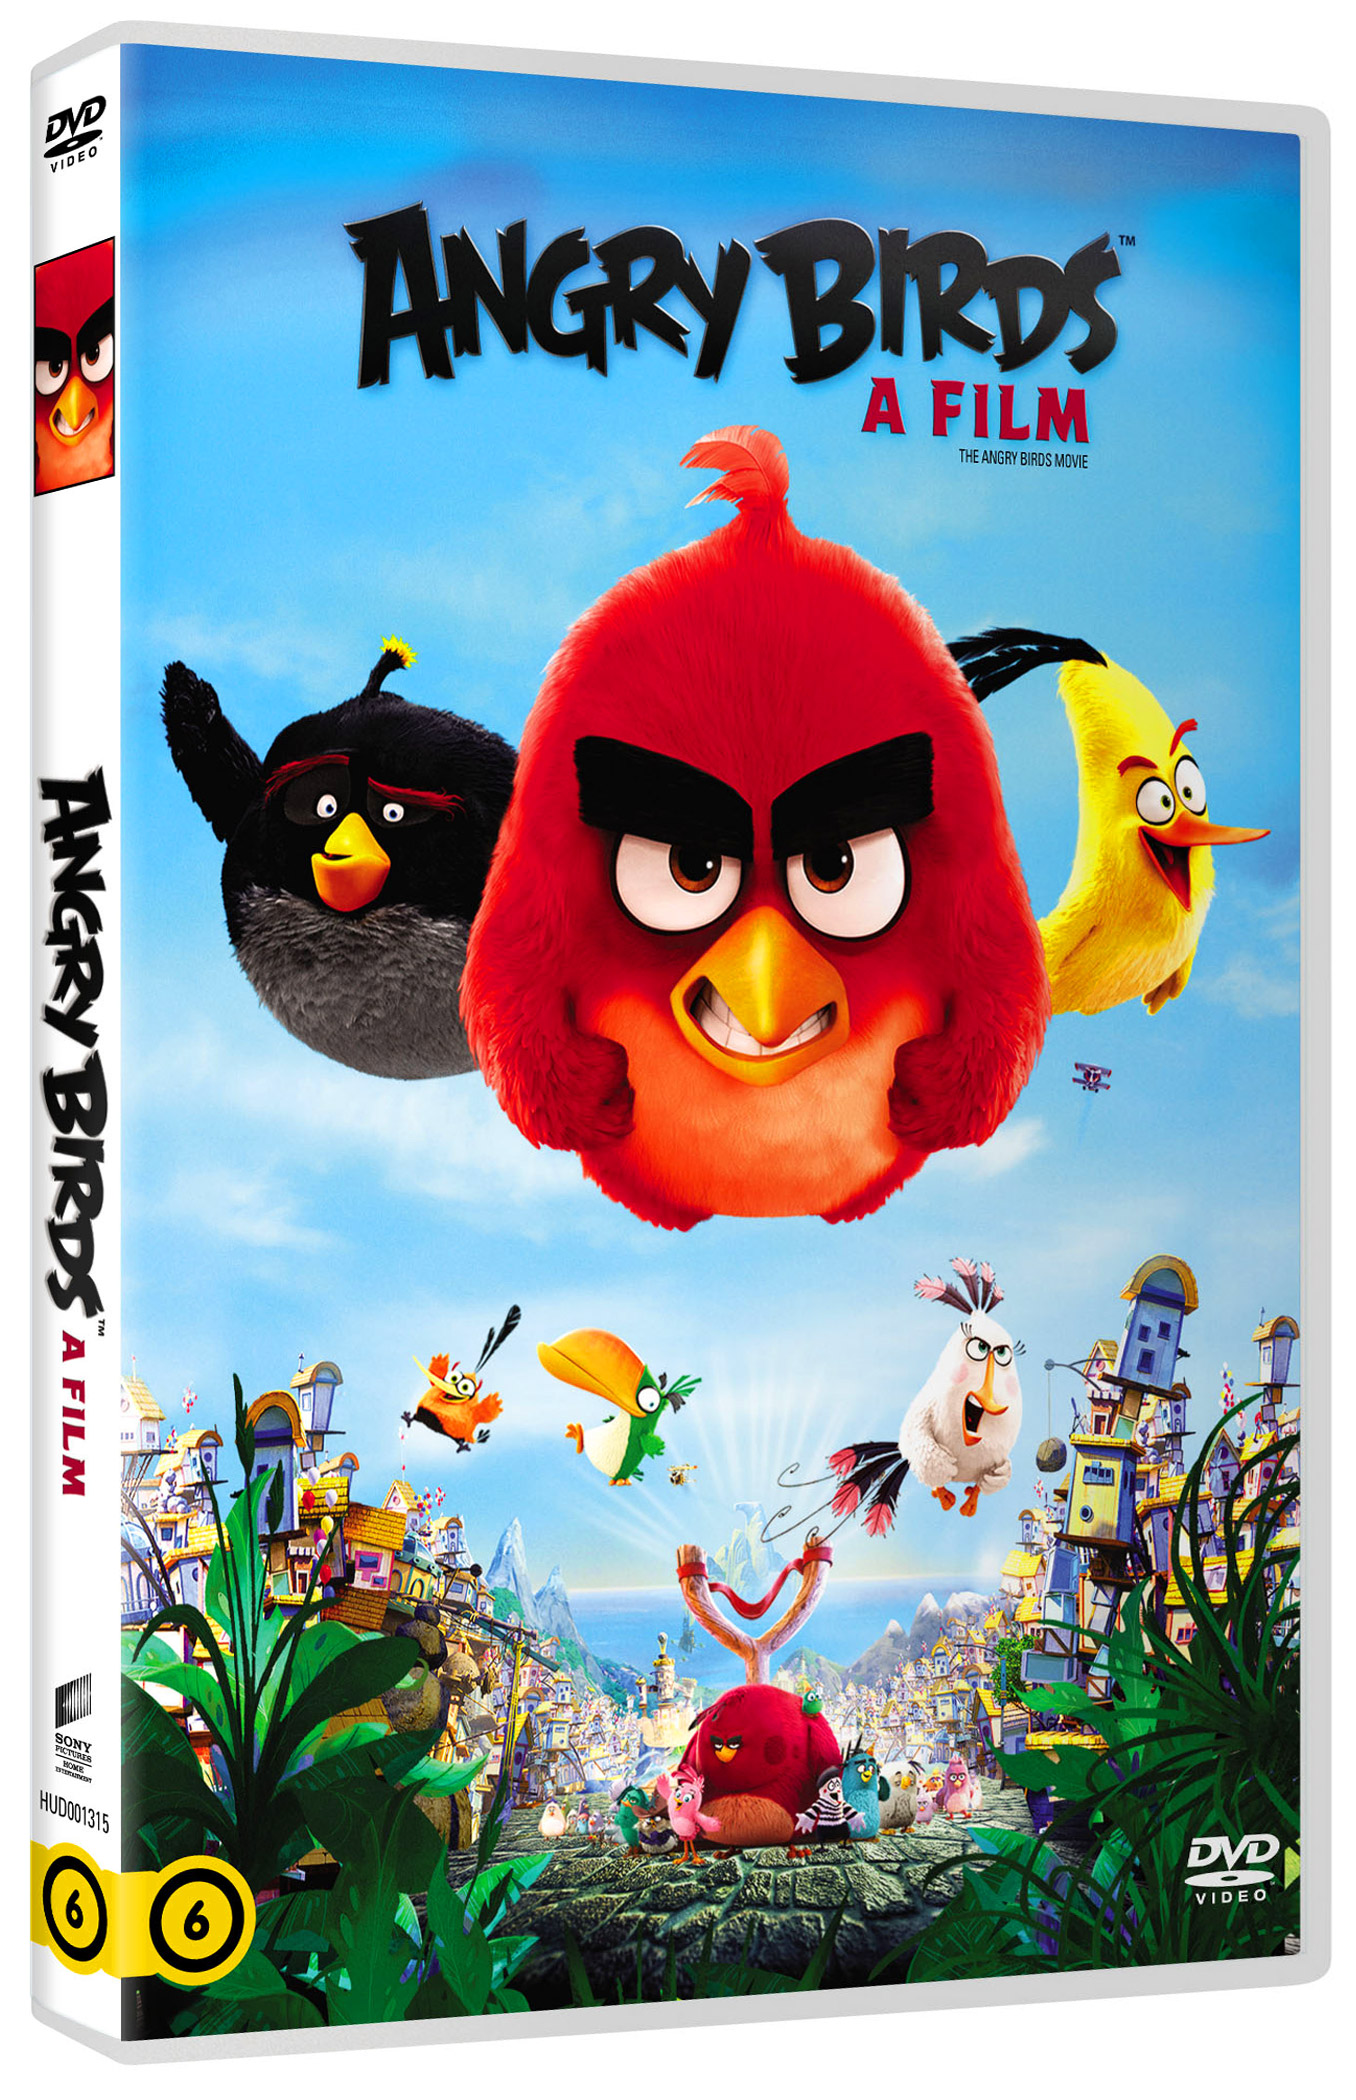 Angry Birds: A film DVD